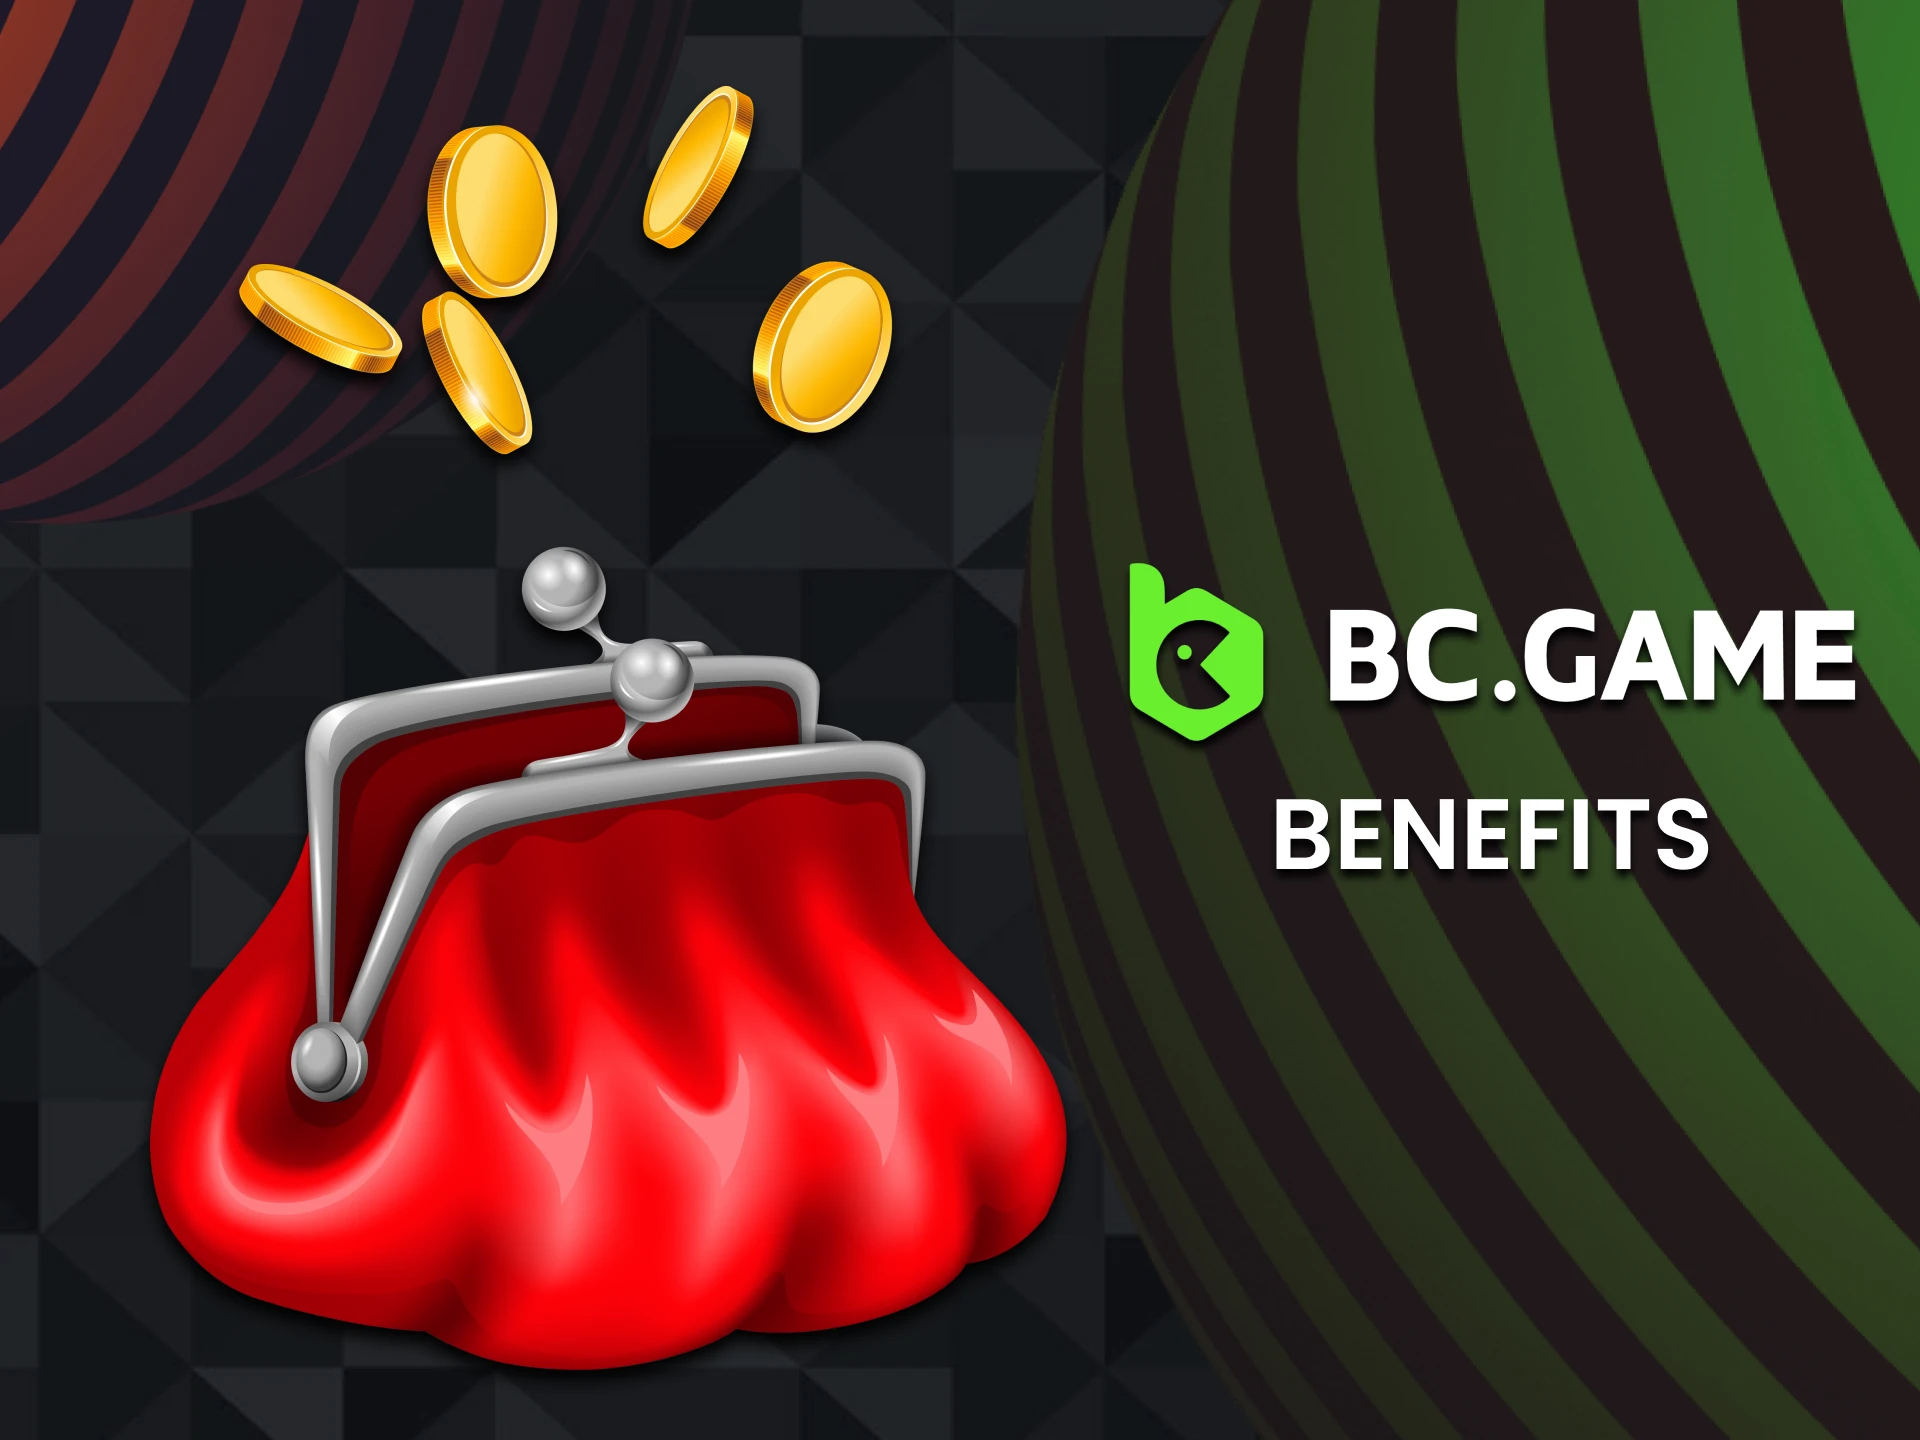 We will tell you about the benefits of the bonus code from BC Game.